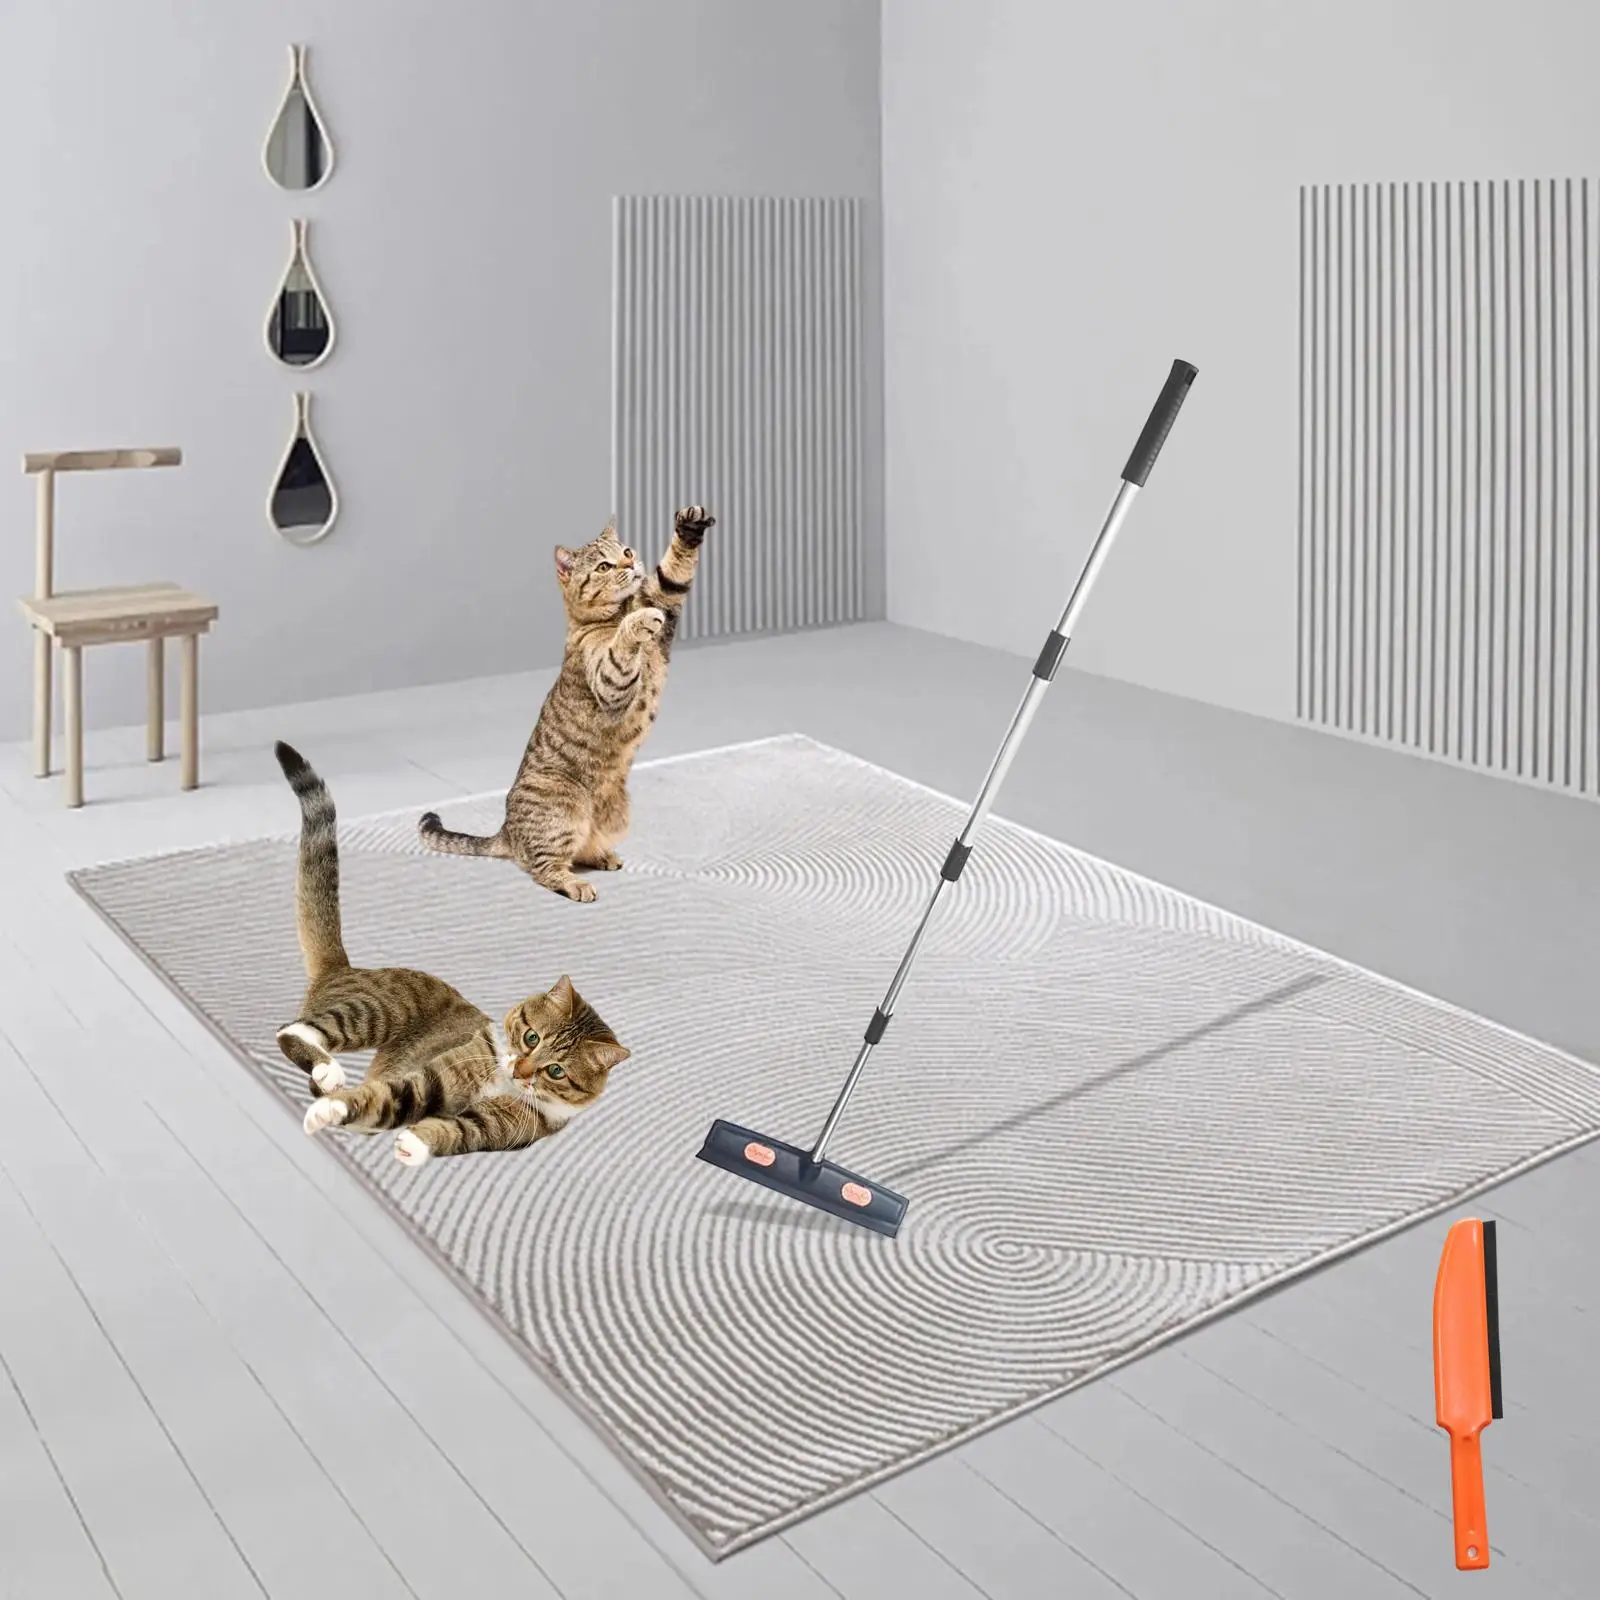 Pet Hair Remover Broom Carpet Rake with Telescopic Handle Cleaning Tool Pet Accessories Pet Hair Removal Broom for Tile Carpet